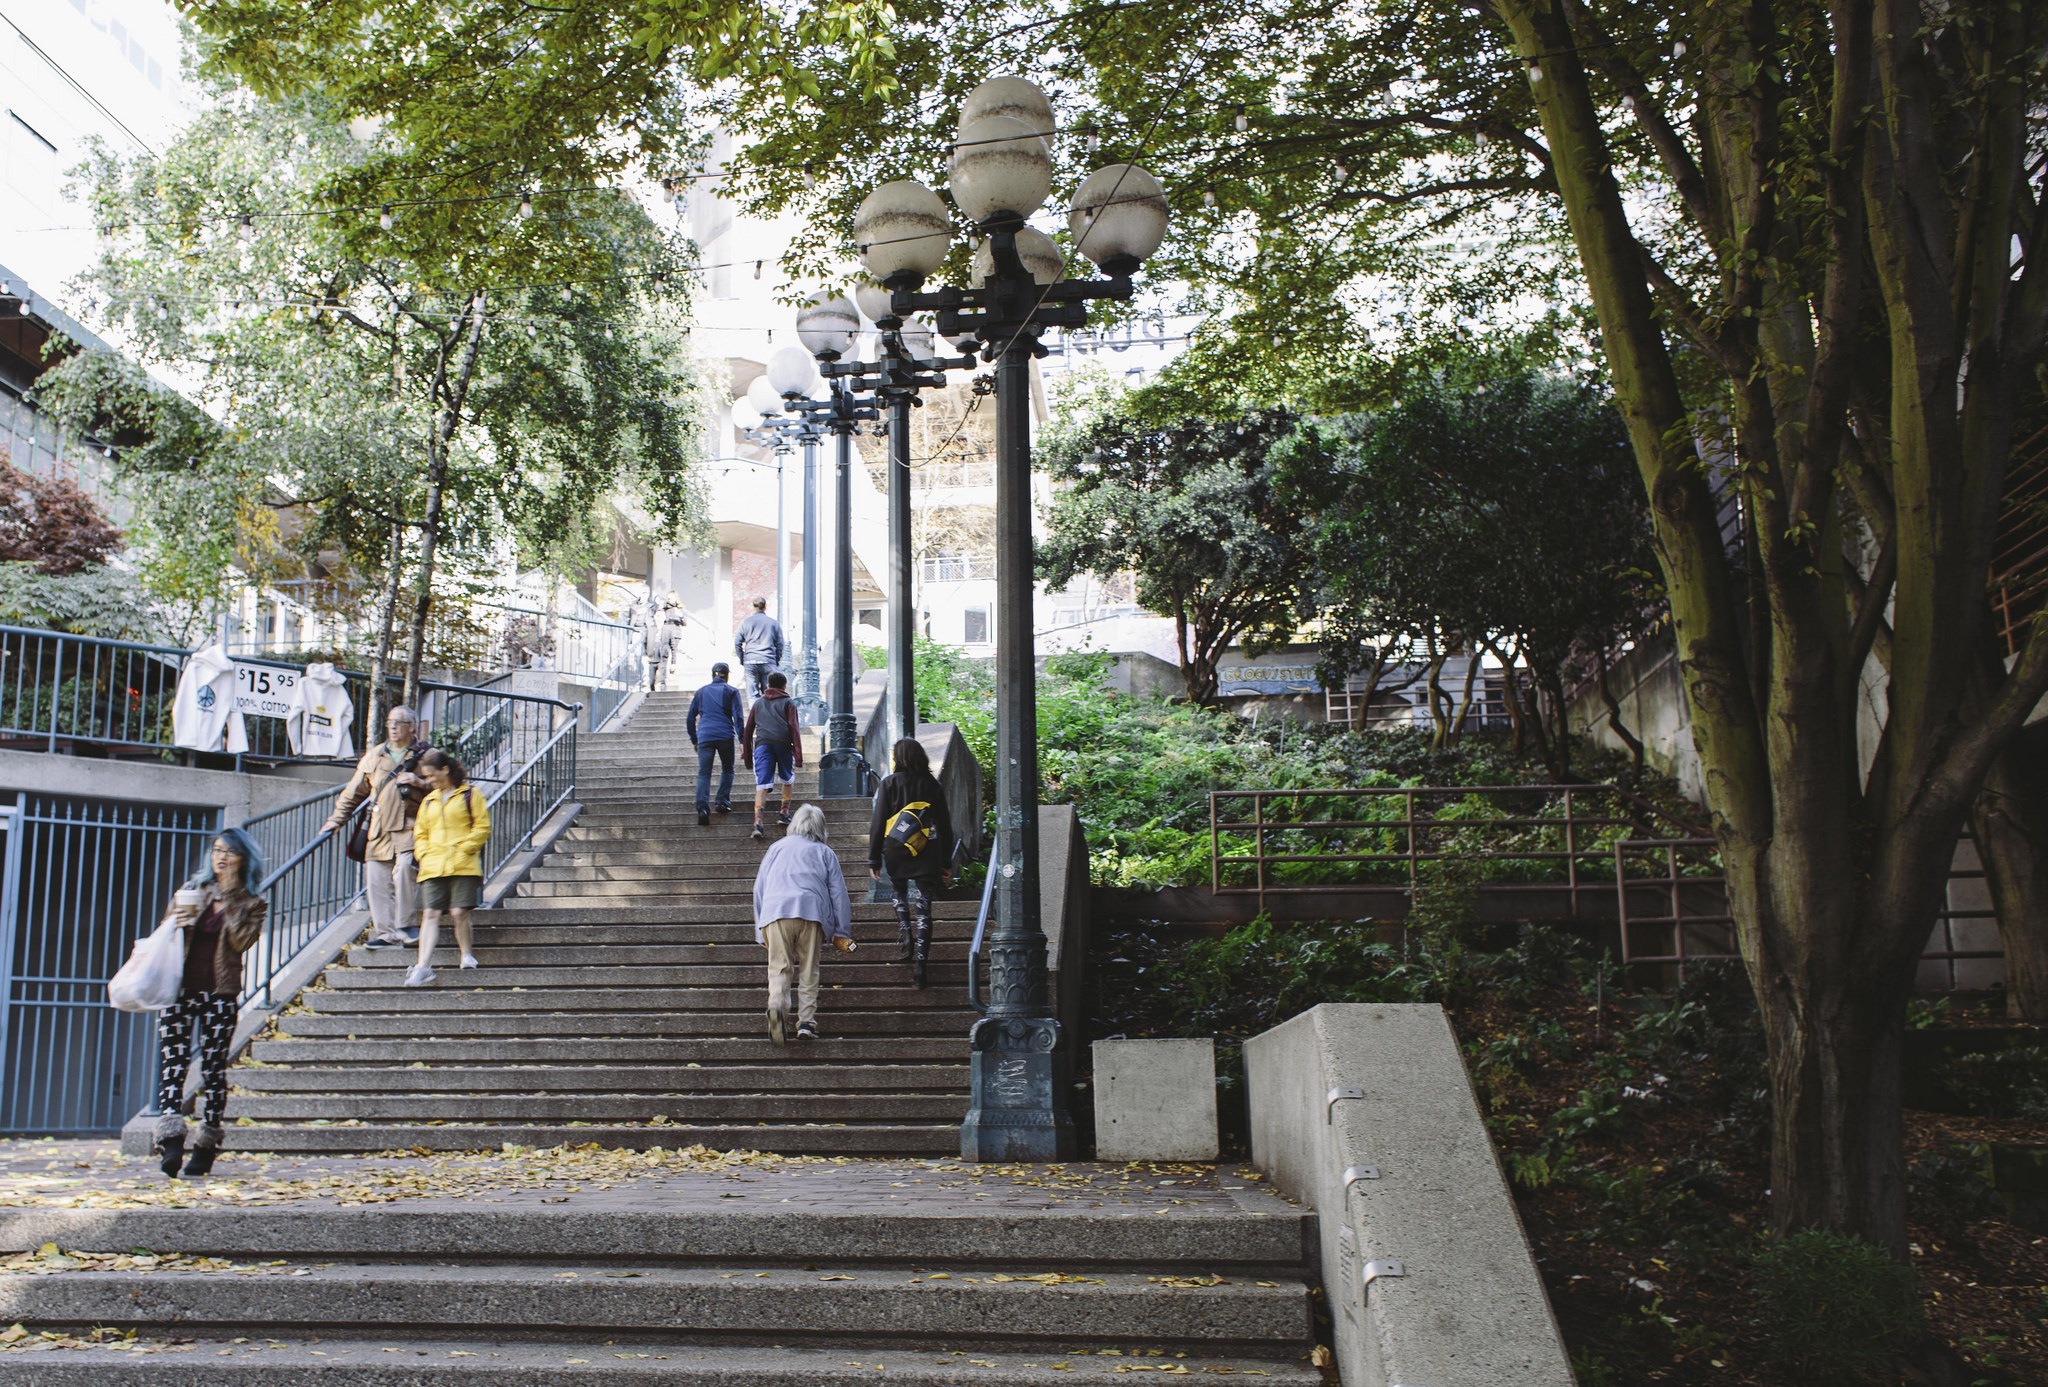 Image of staircase with railing up a steep hill with trees and lights